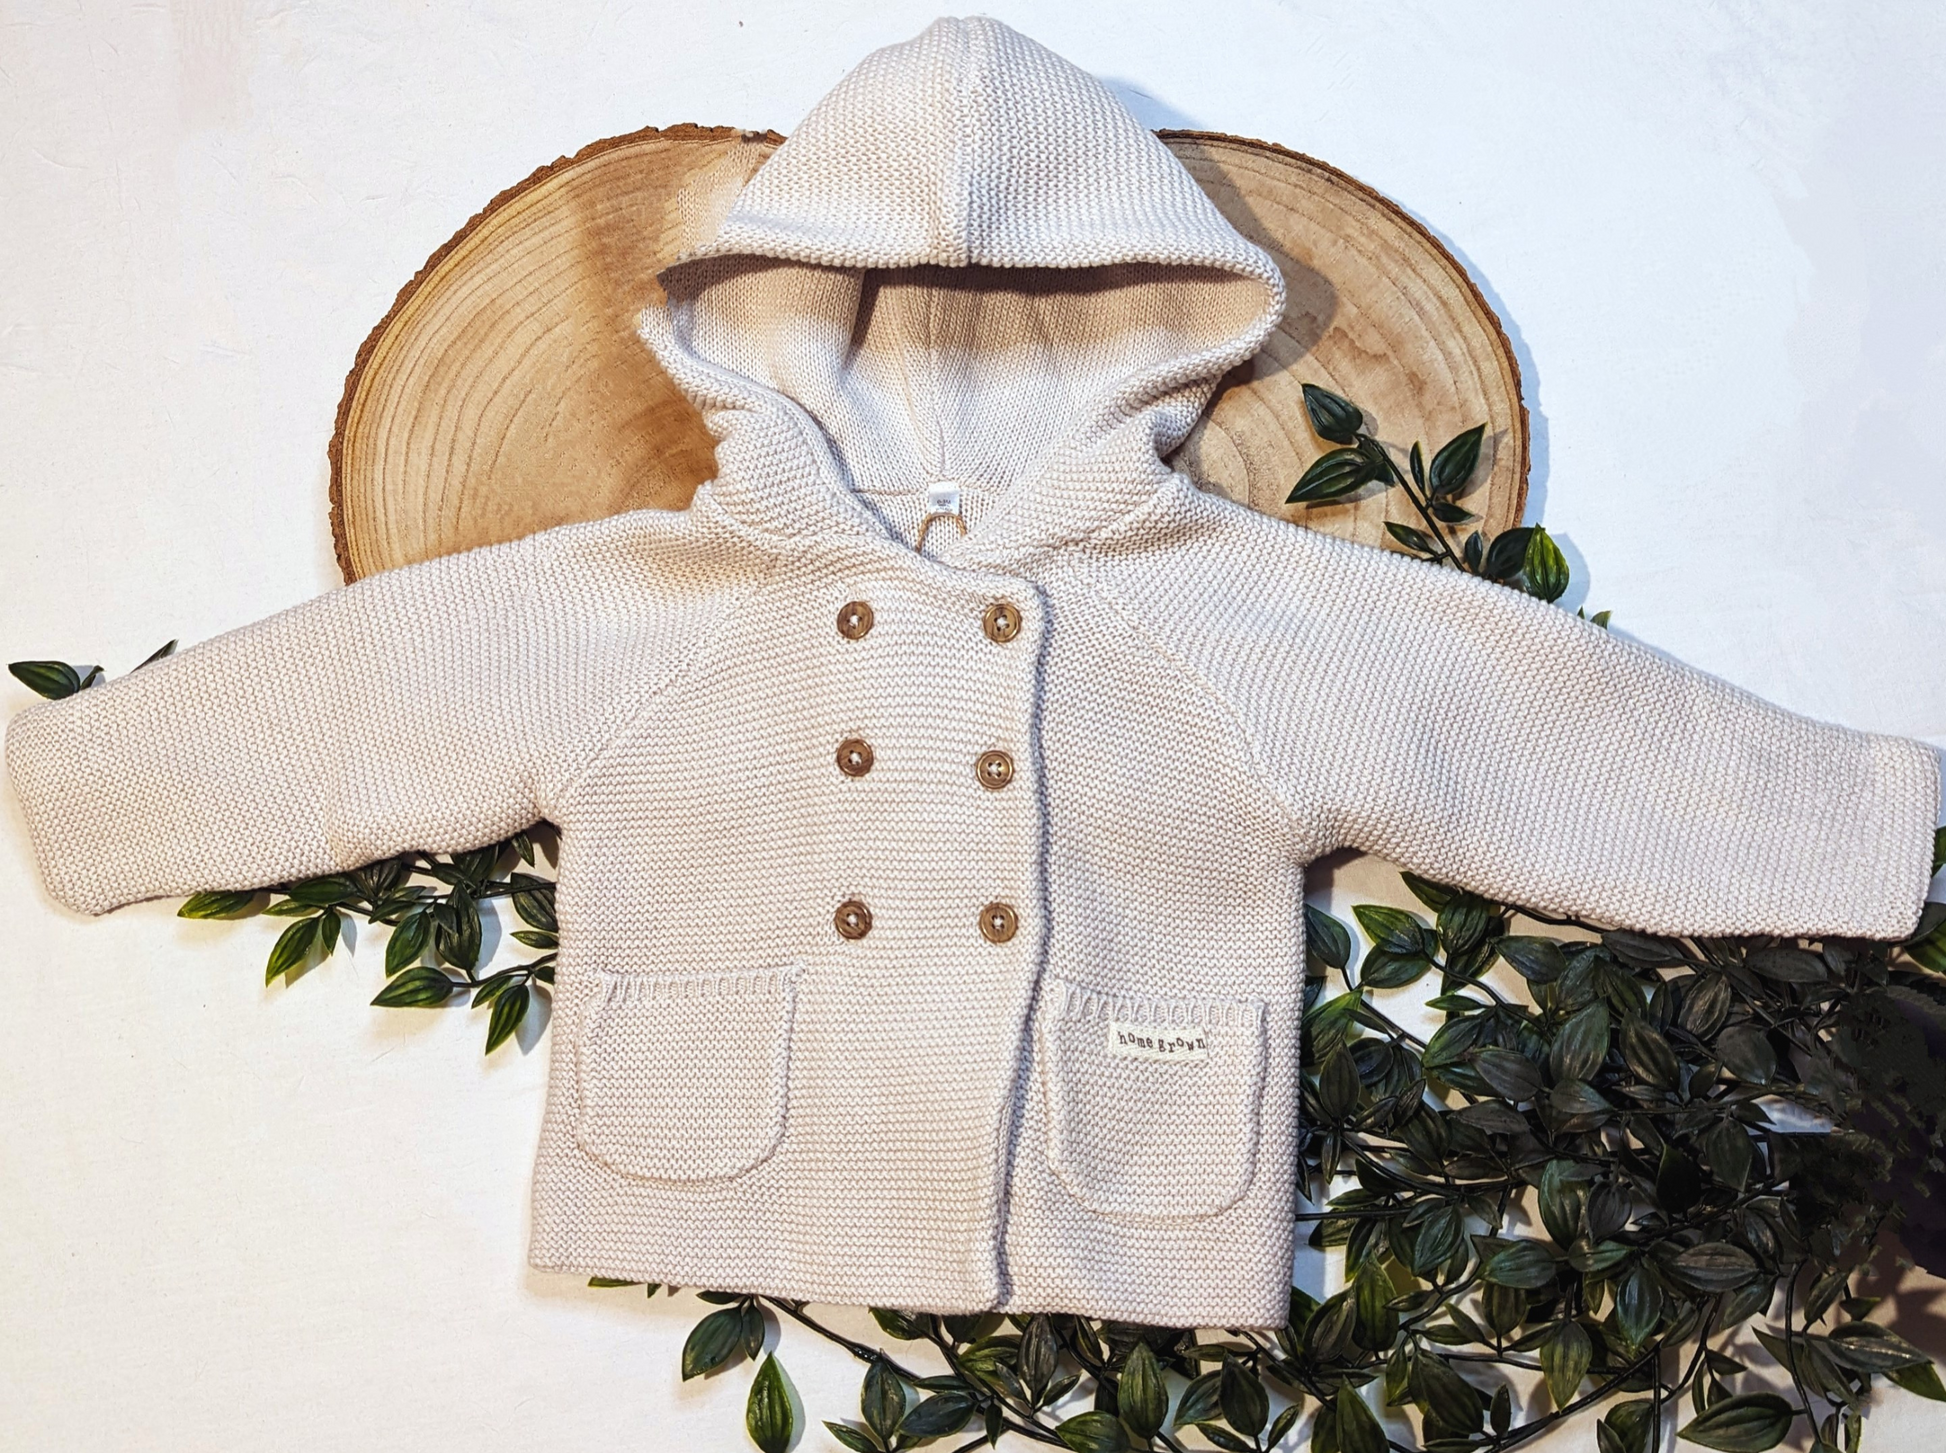 Baby cardigan, knitted in beige organic cotton. Features an adorable hood, double breasted wooden button fastenings and two pockets for practicality.